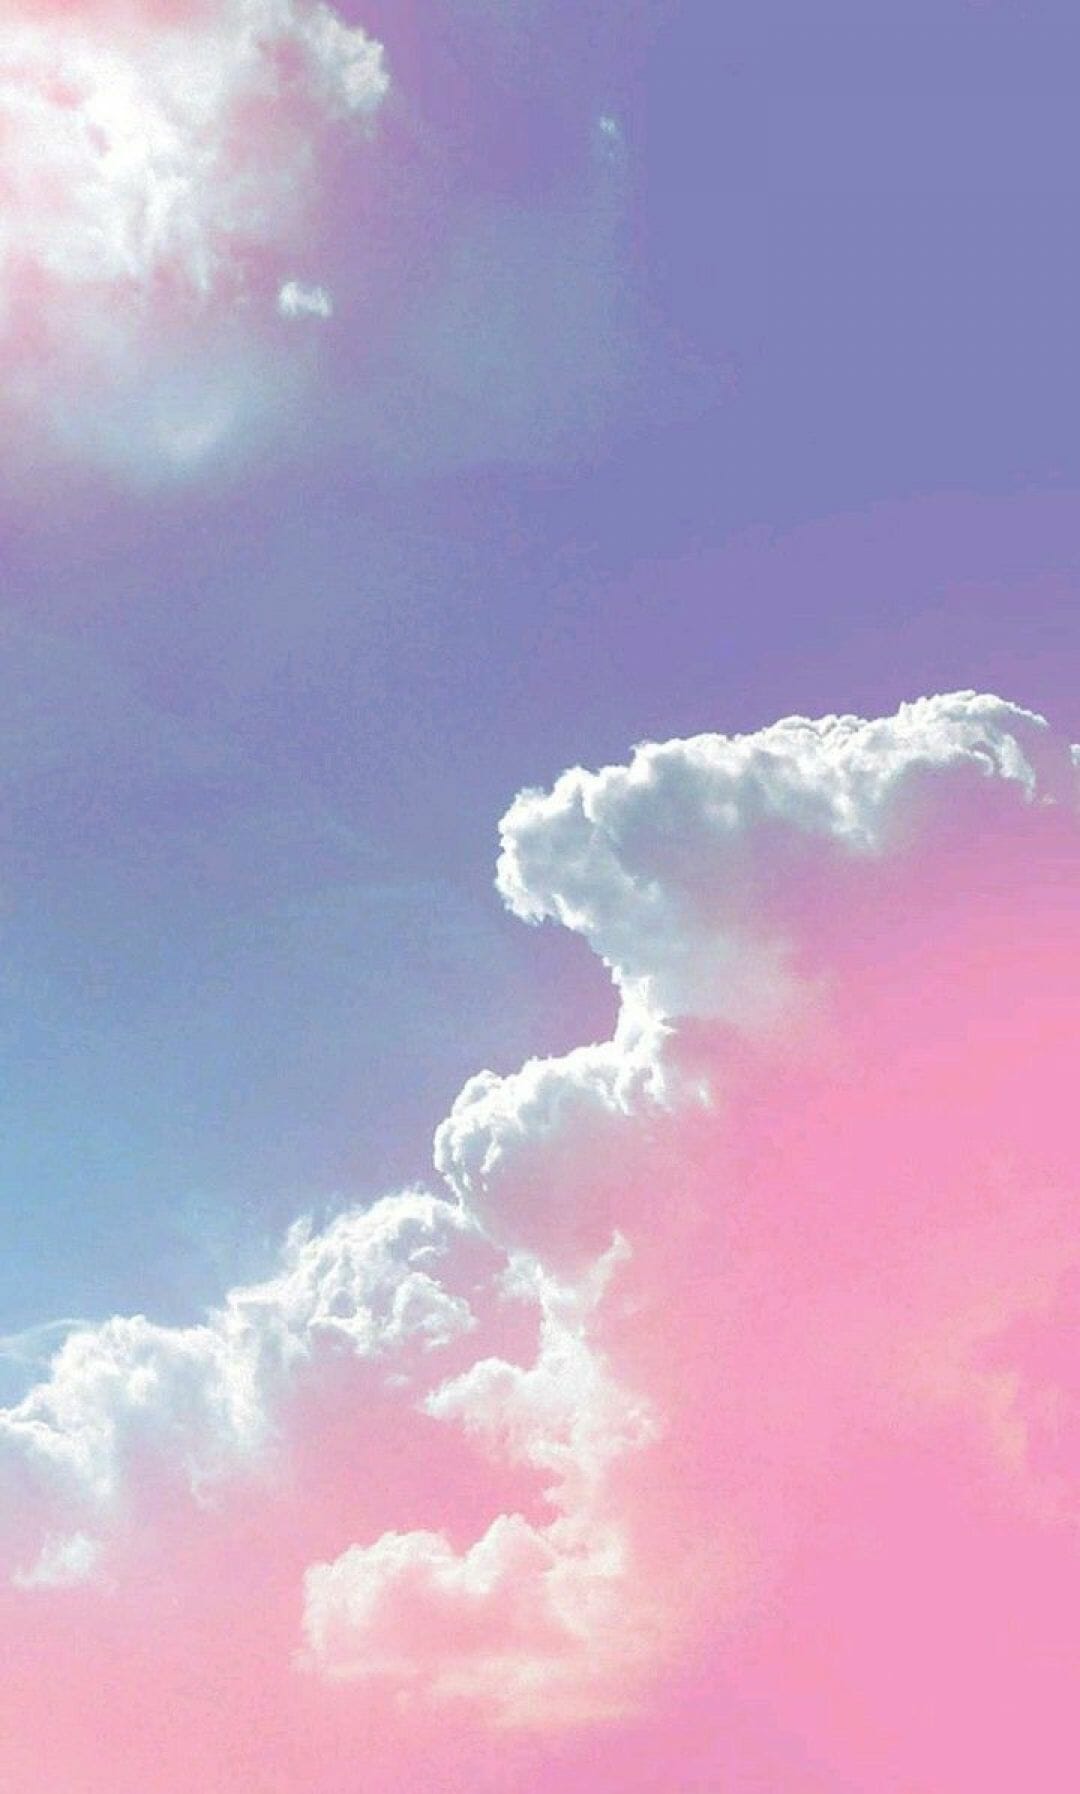 IPhone wallpaper with beautiful, cute and lovely a wallpaper with a sky background - Cloud